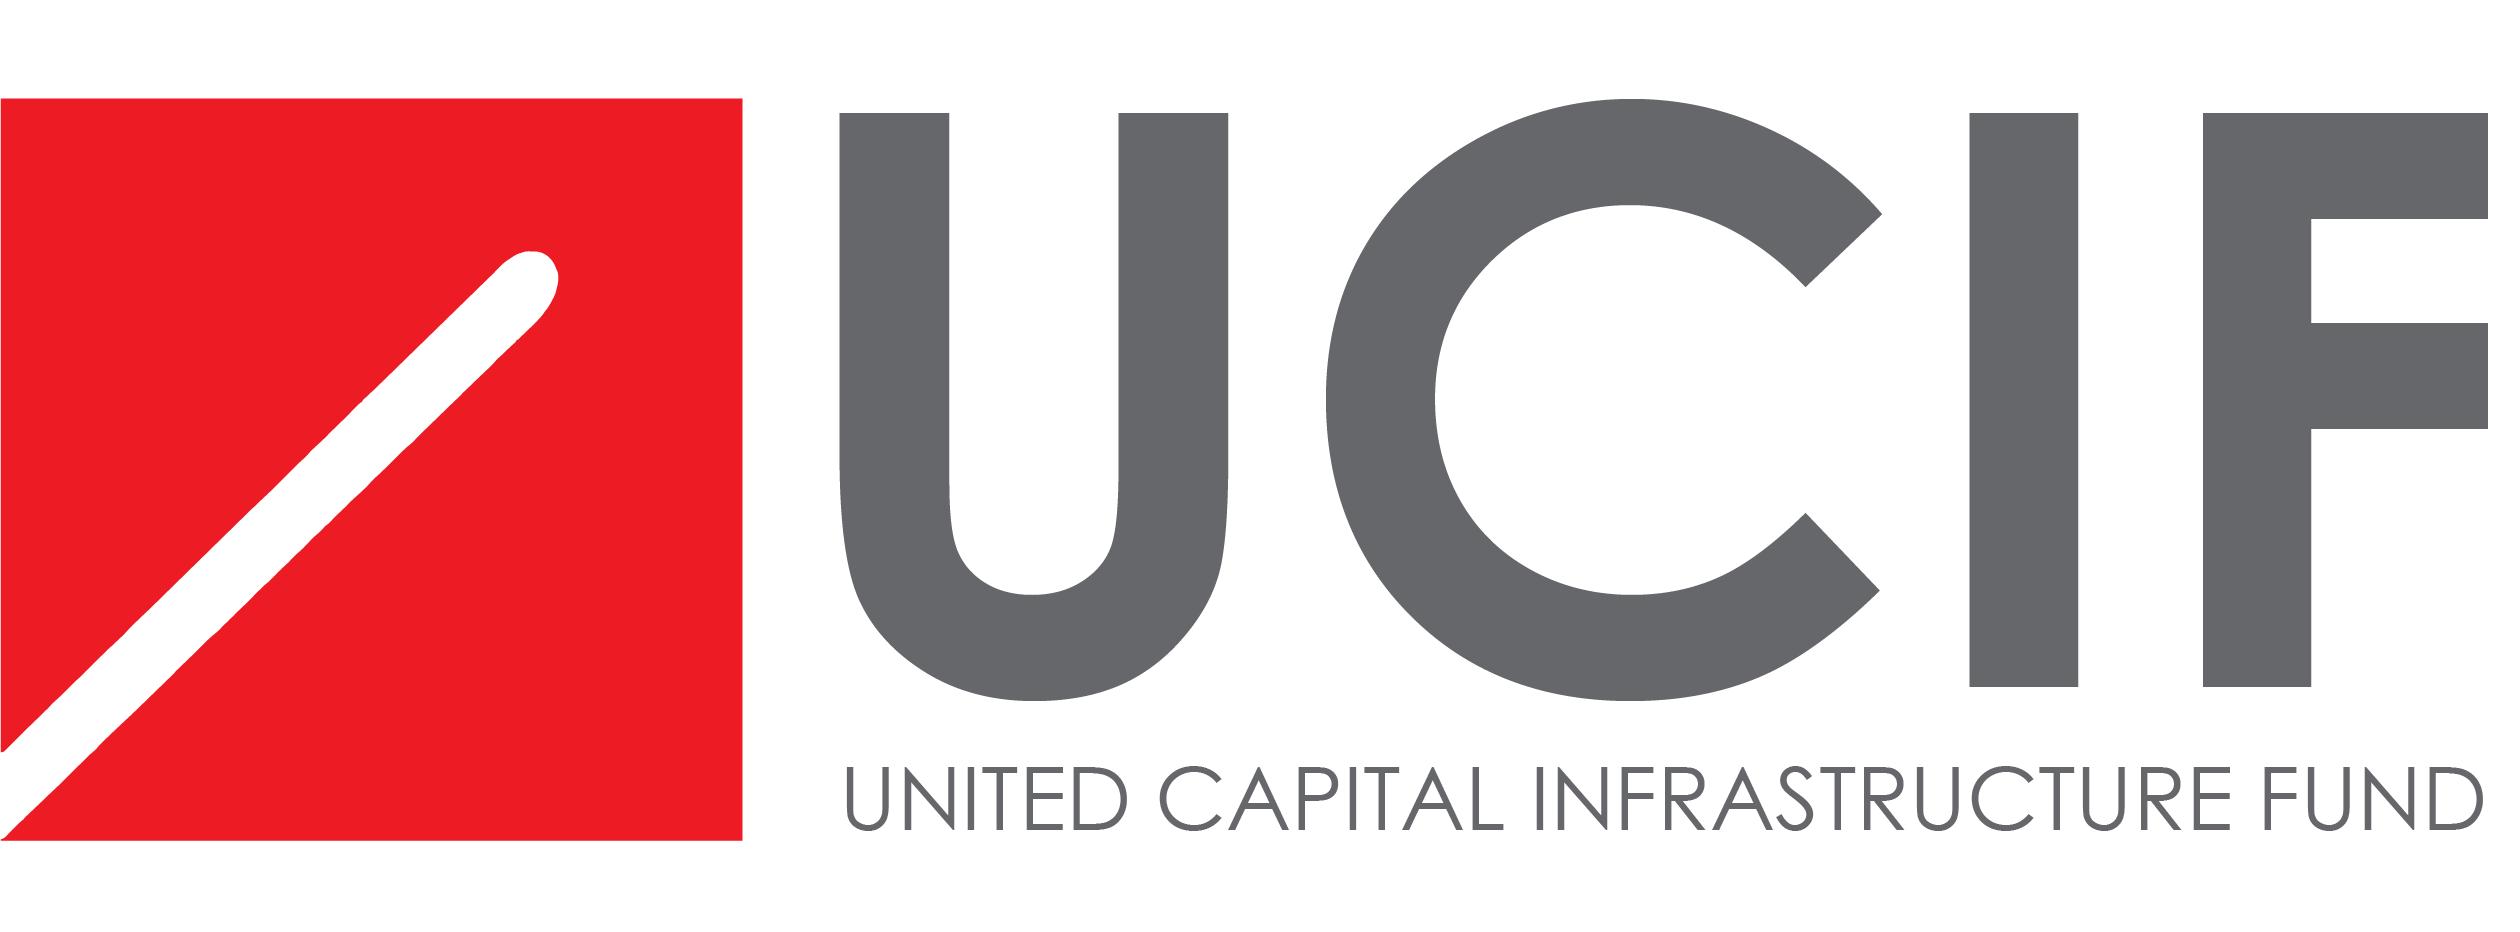 United Capital Infrastructure Fund